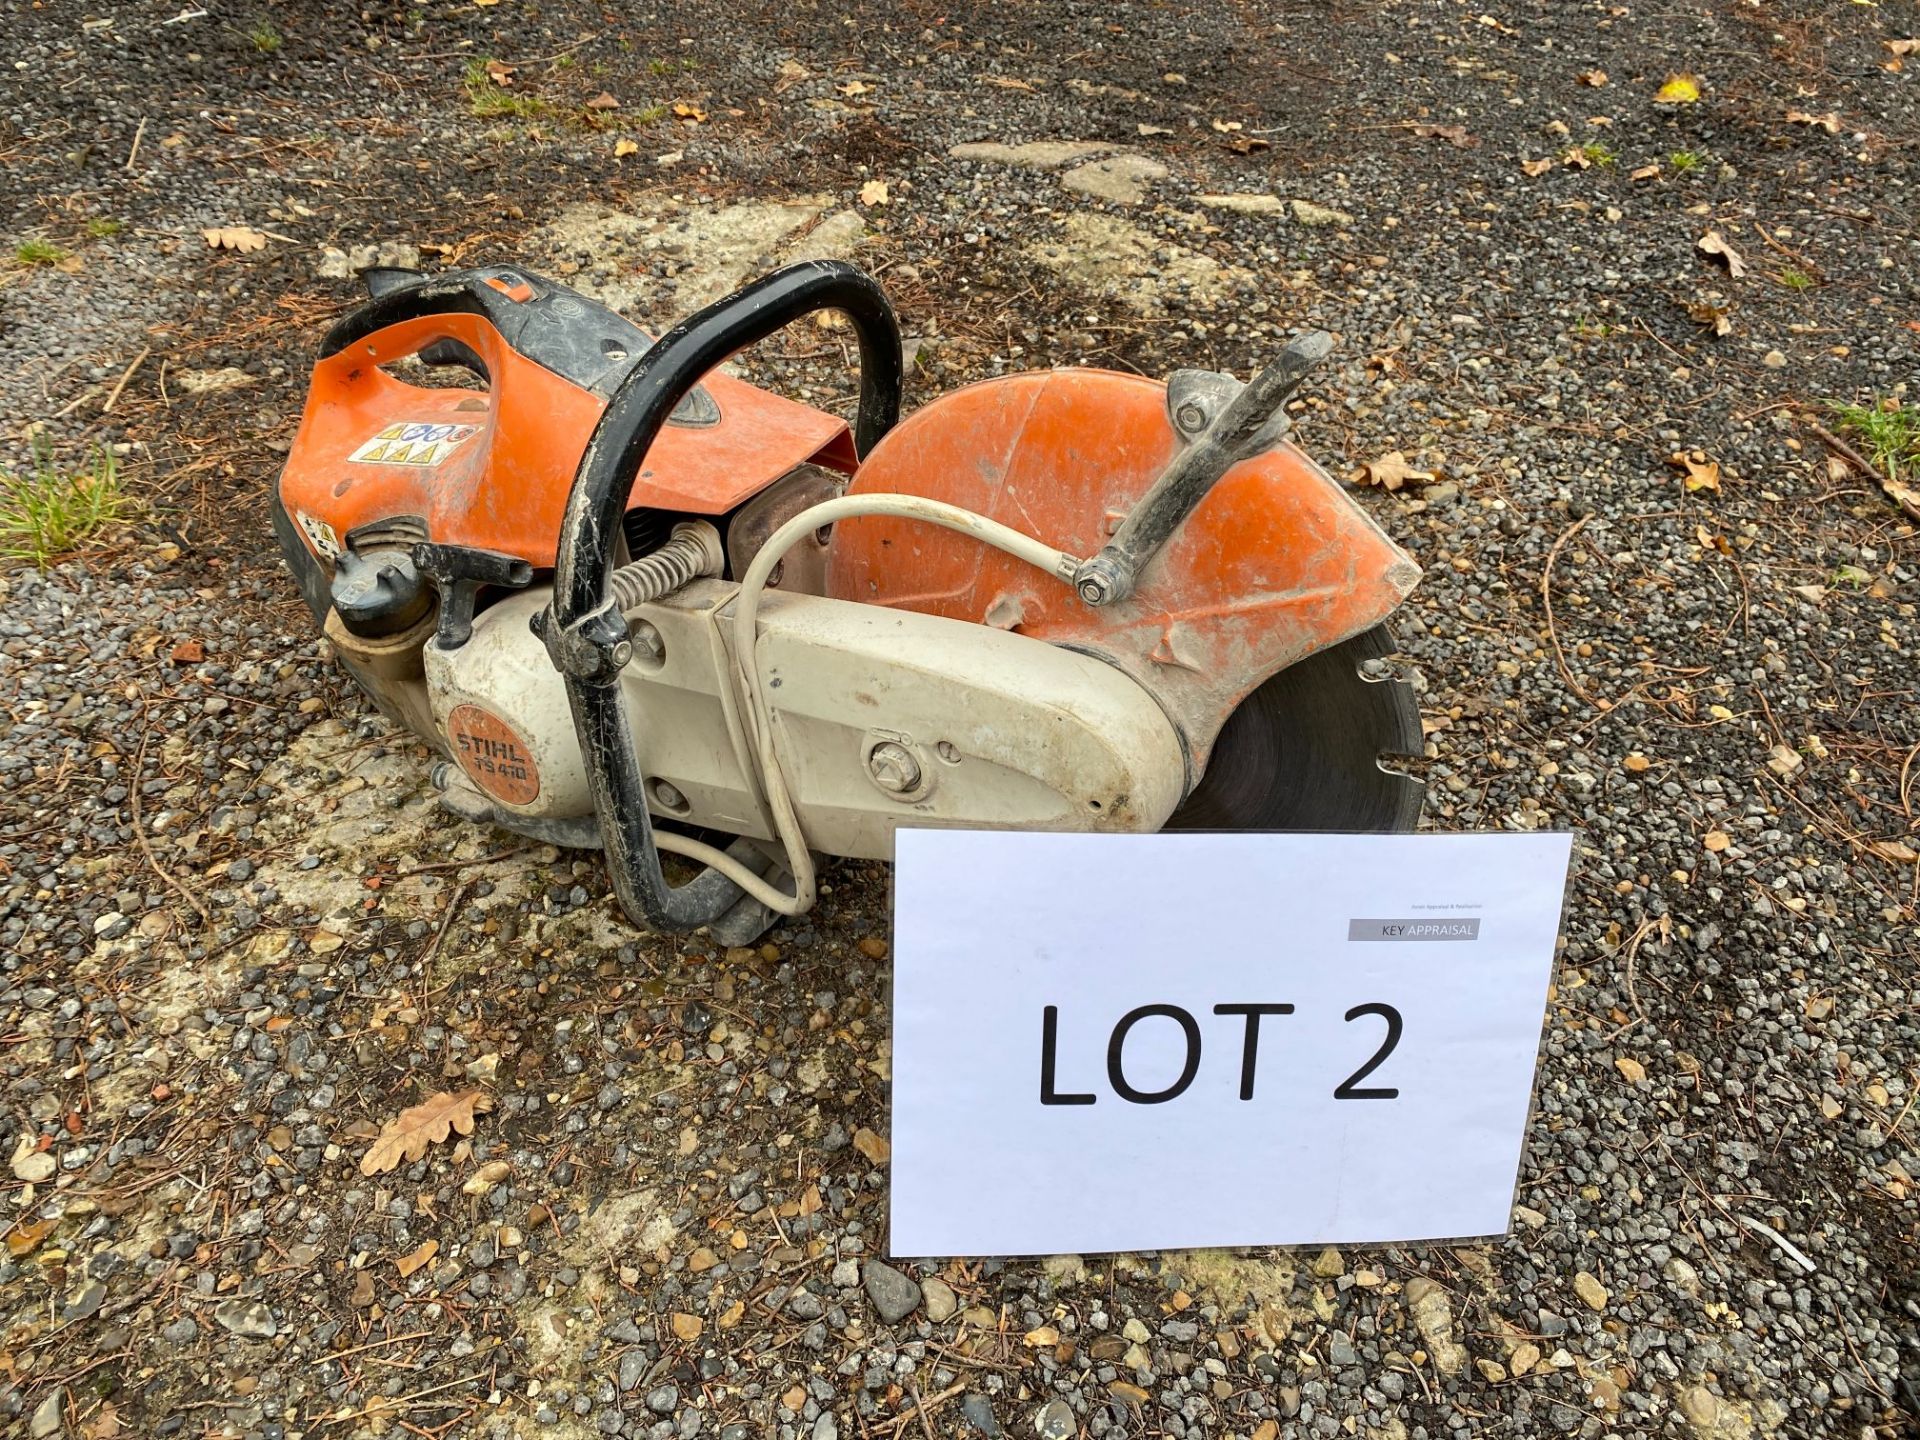 Stihl petrol cutter (no plate details available)